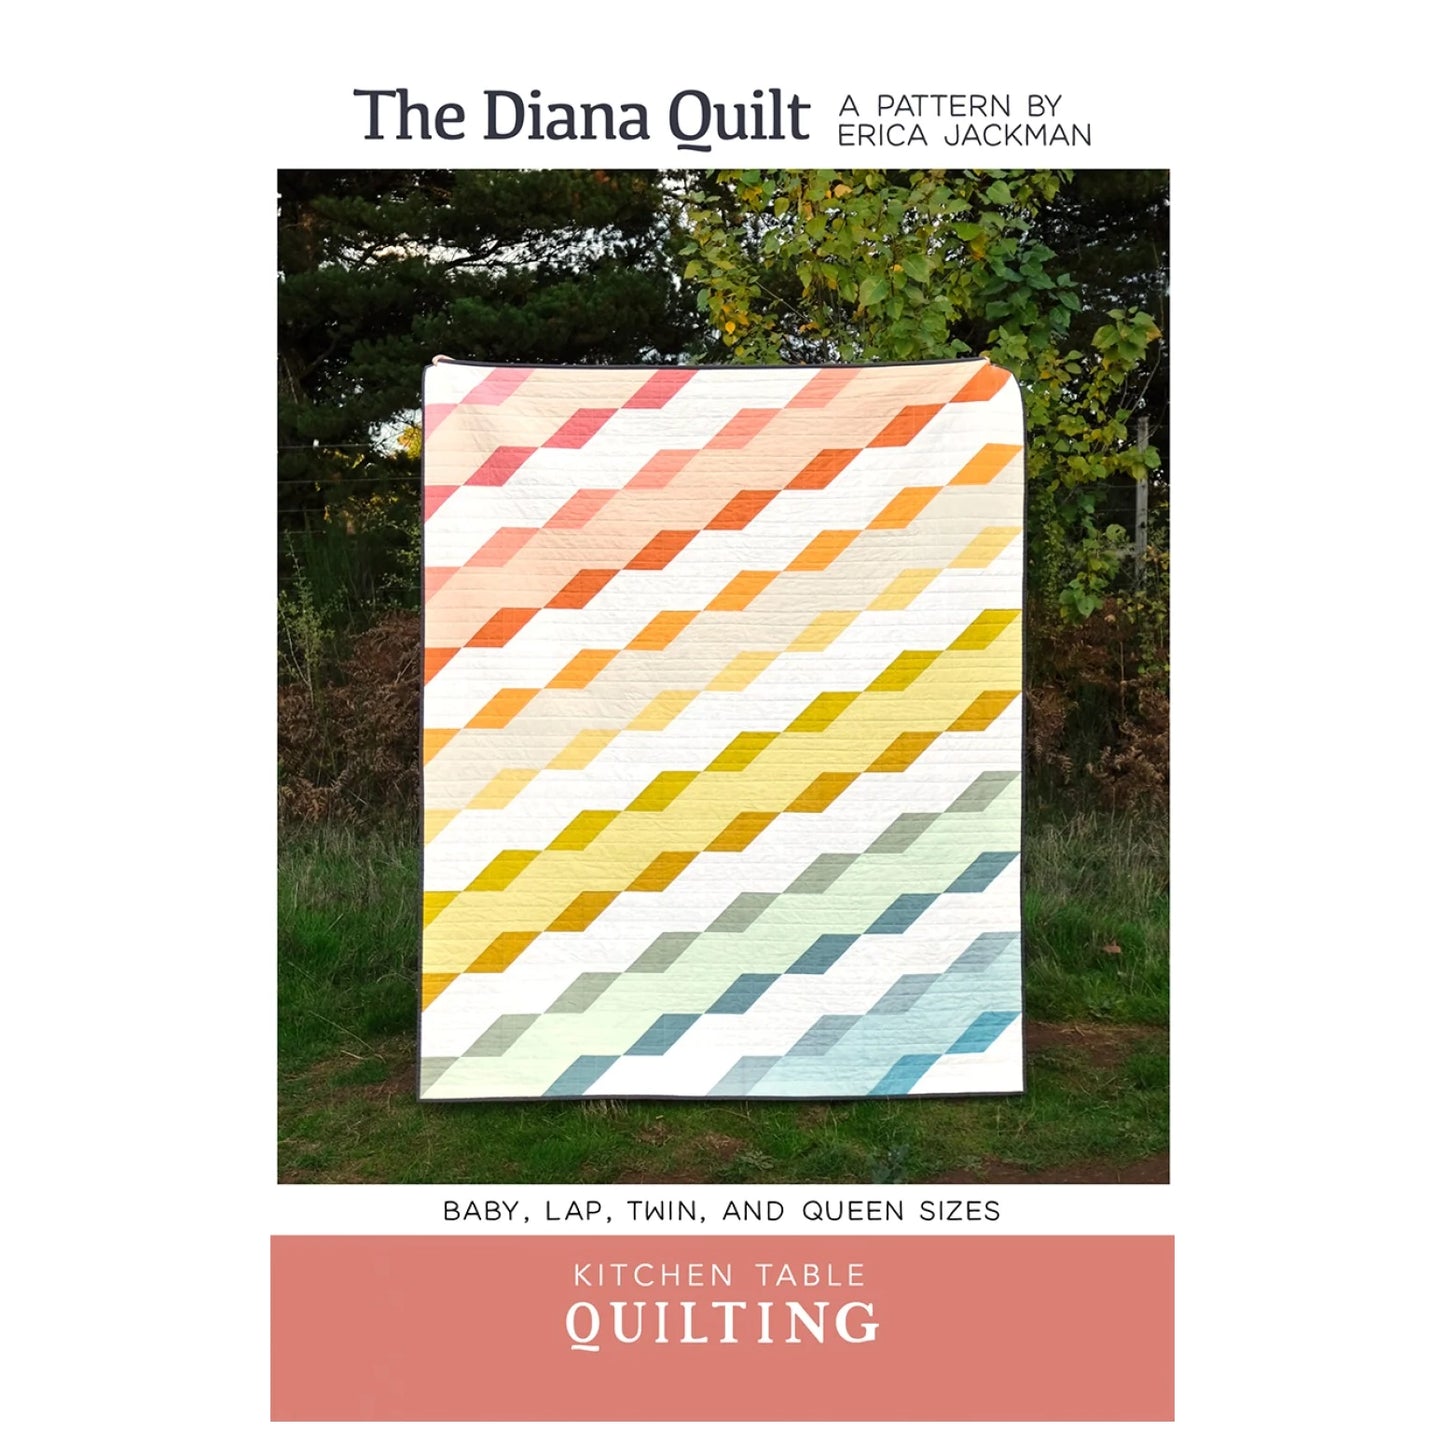 Kitchen Table Quilting - The Diana Quilt Pattern